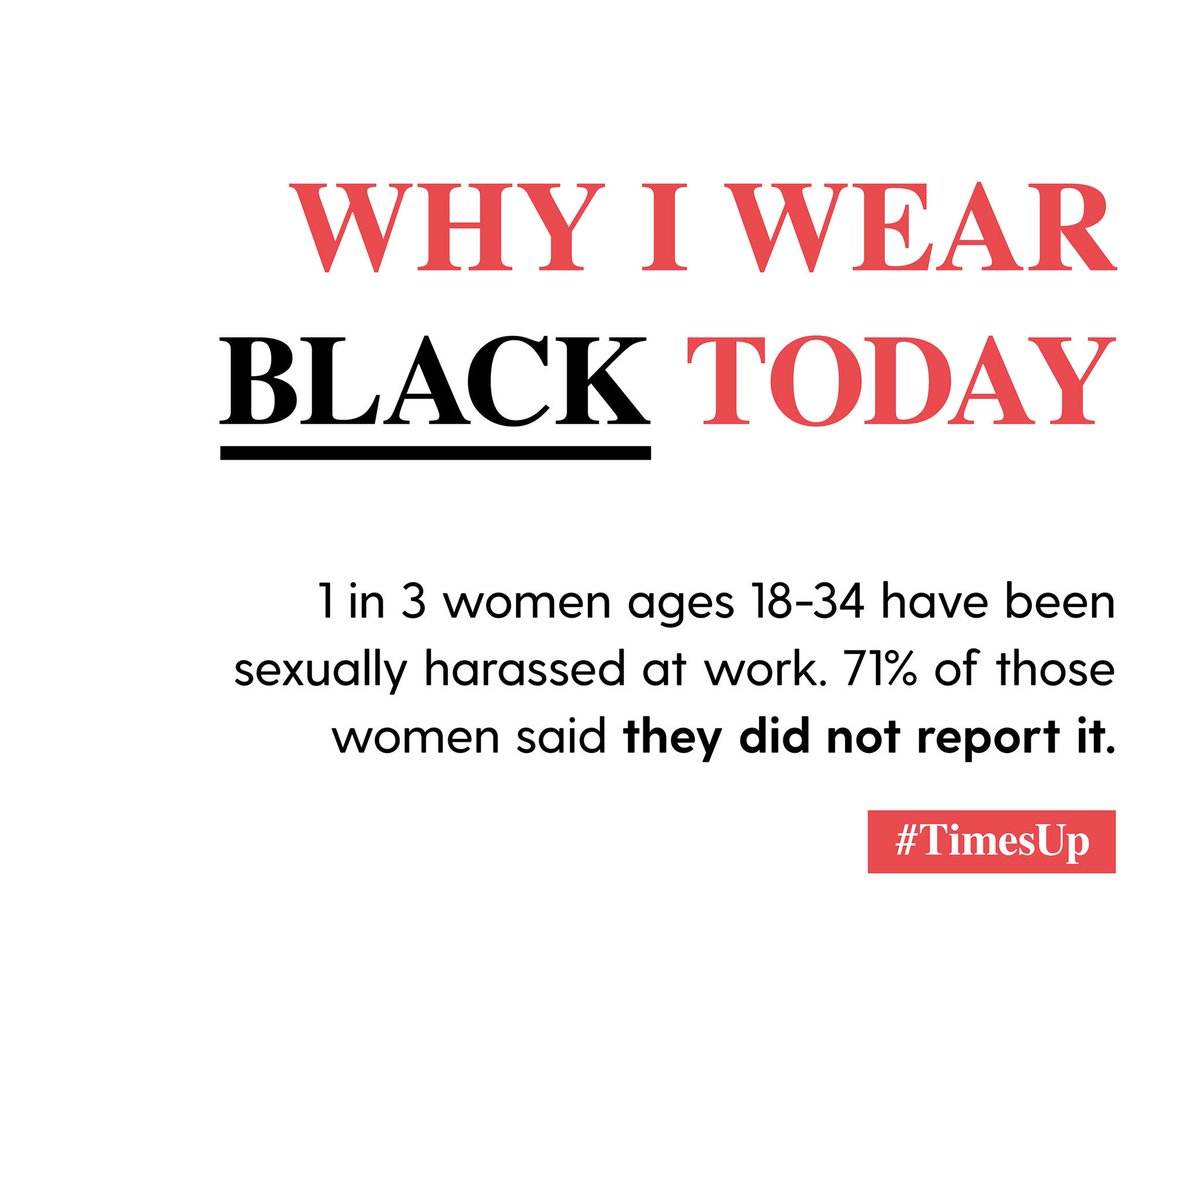 TODAY is the day! #TIMESUP #WhyWeWearBlack https://t.co/x36HB1QujQ